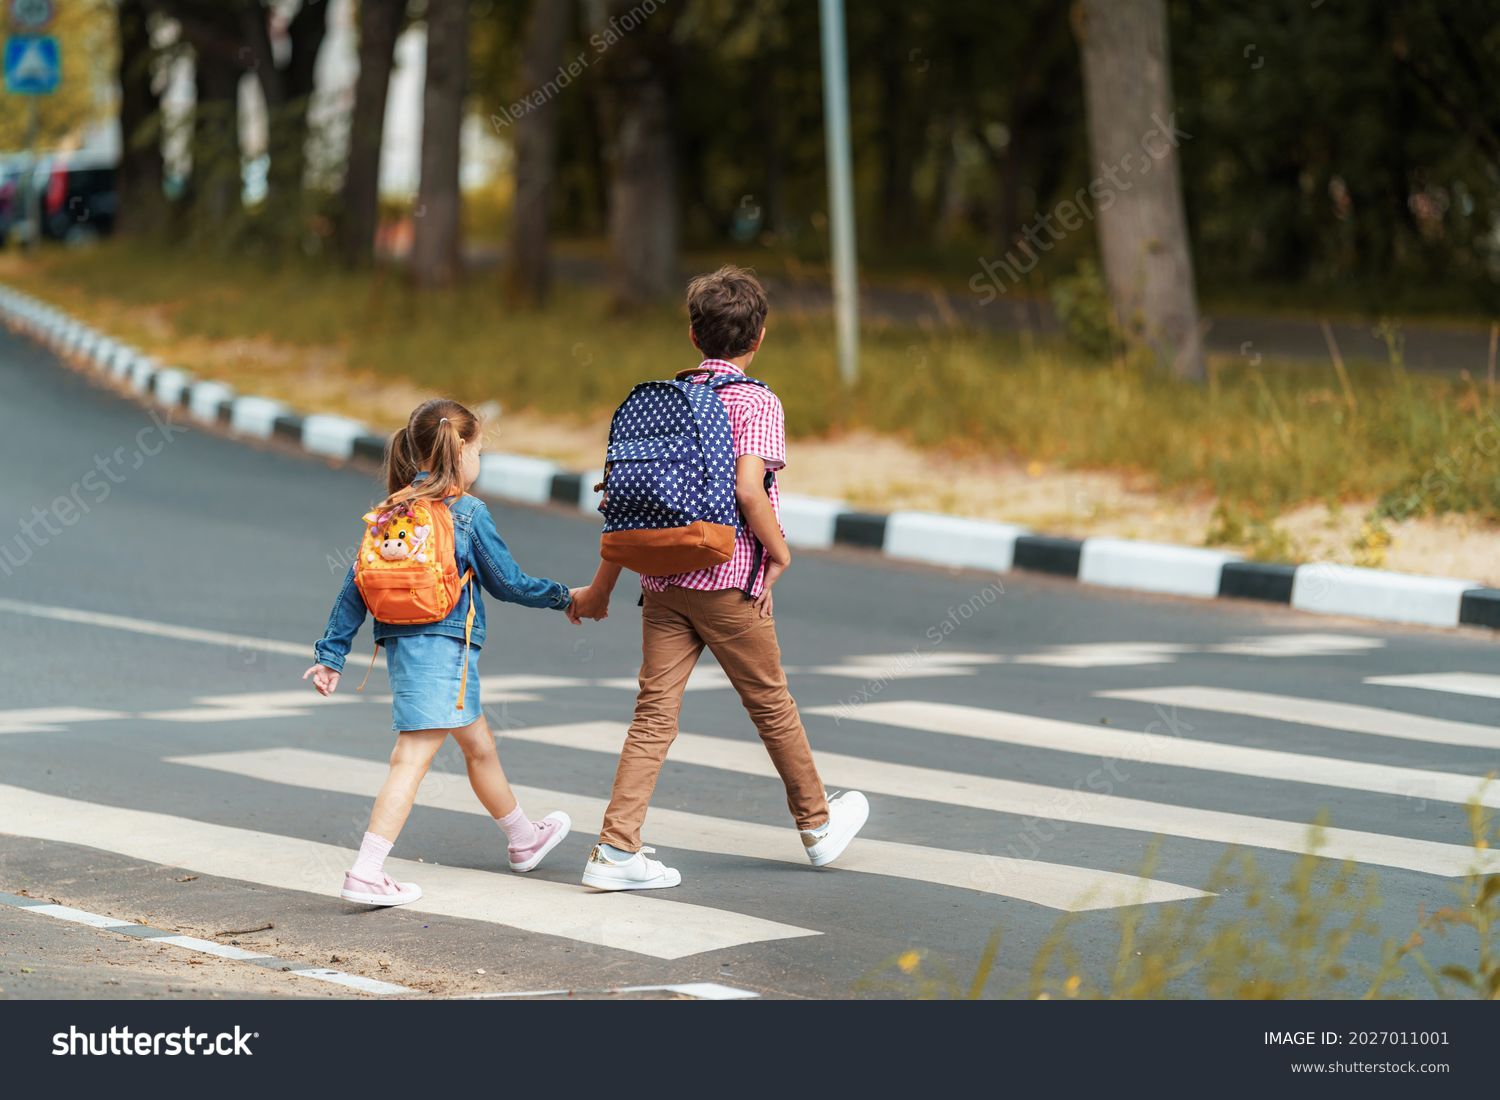 girl and boy with backpacks carefully cross road on pedestrian crossing on their way to school. Traffic rules. Walking path along zebra in city. concept of pedestrians crossing pedestrian crossing. #2027011001